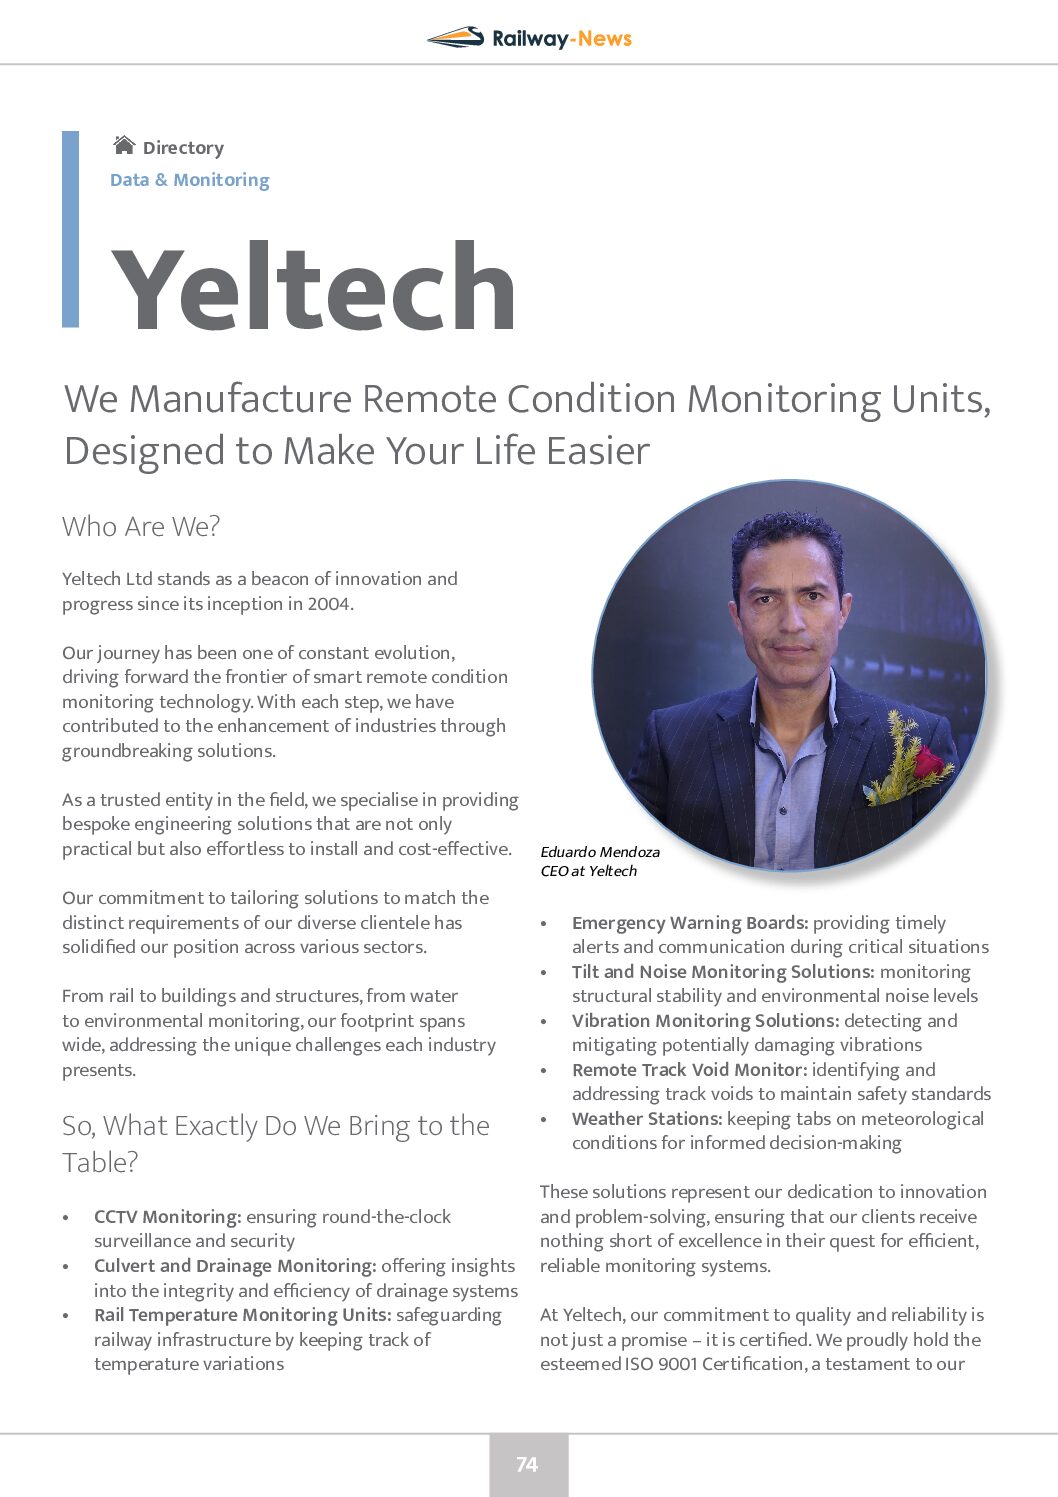 We Manufacture Remote Condition Monitoring Units, Designed to Make Your Life Easier